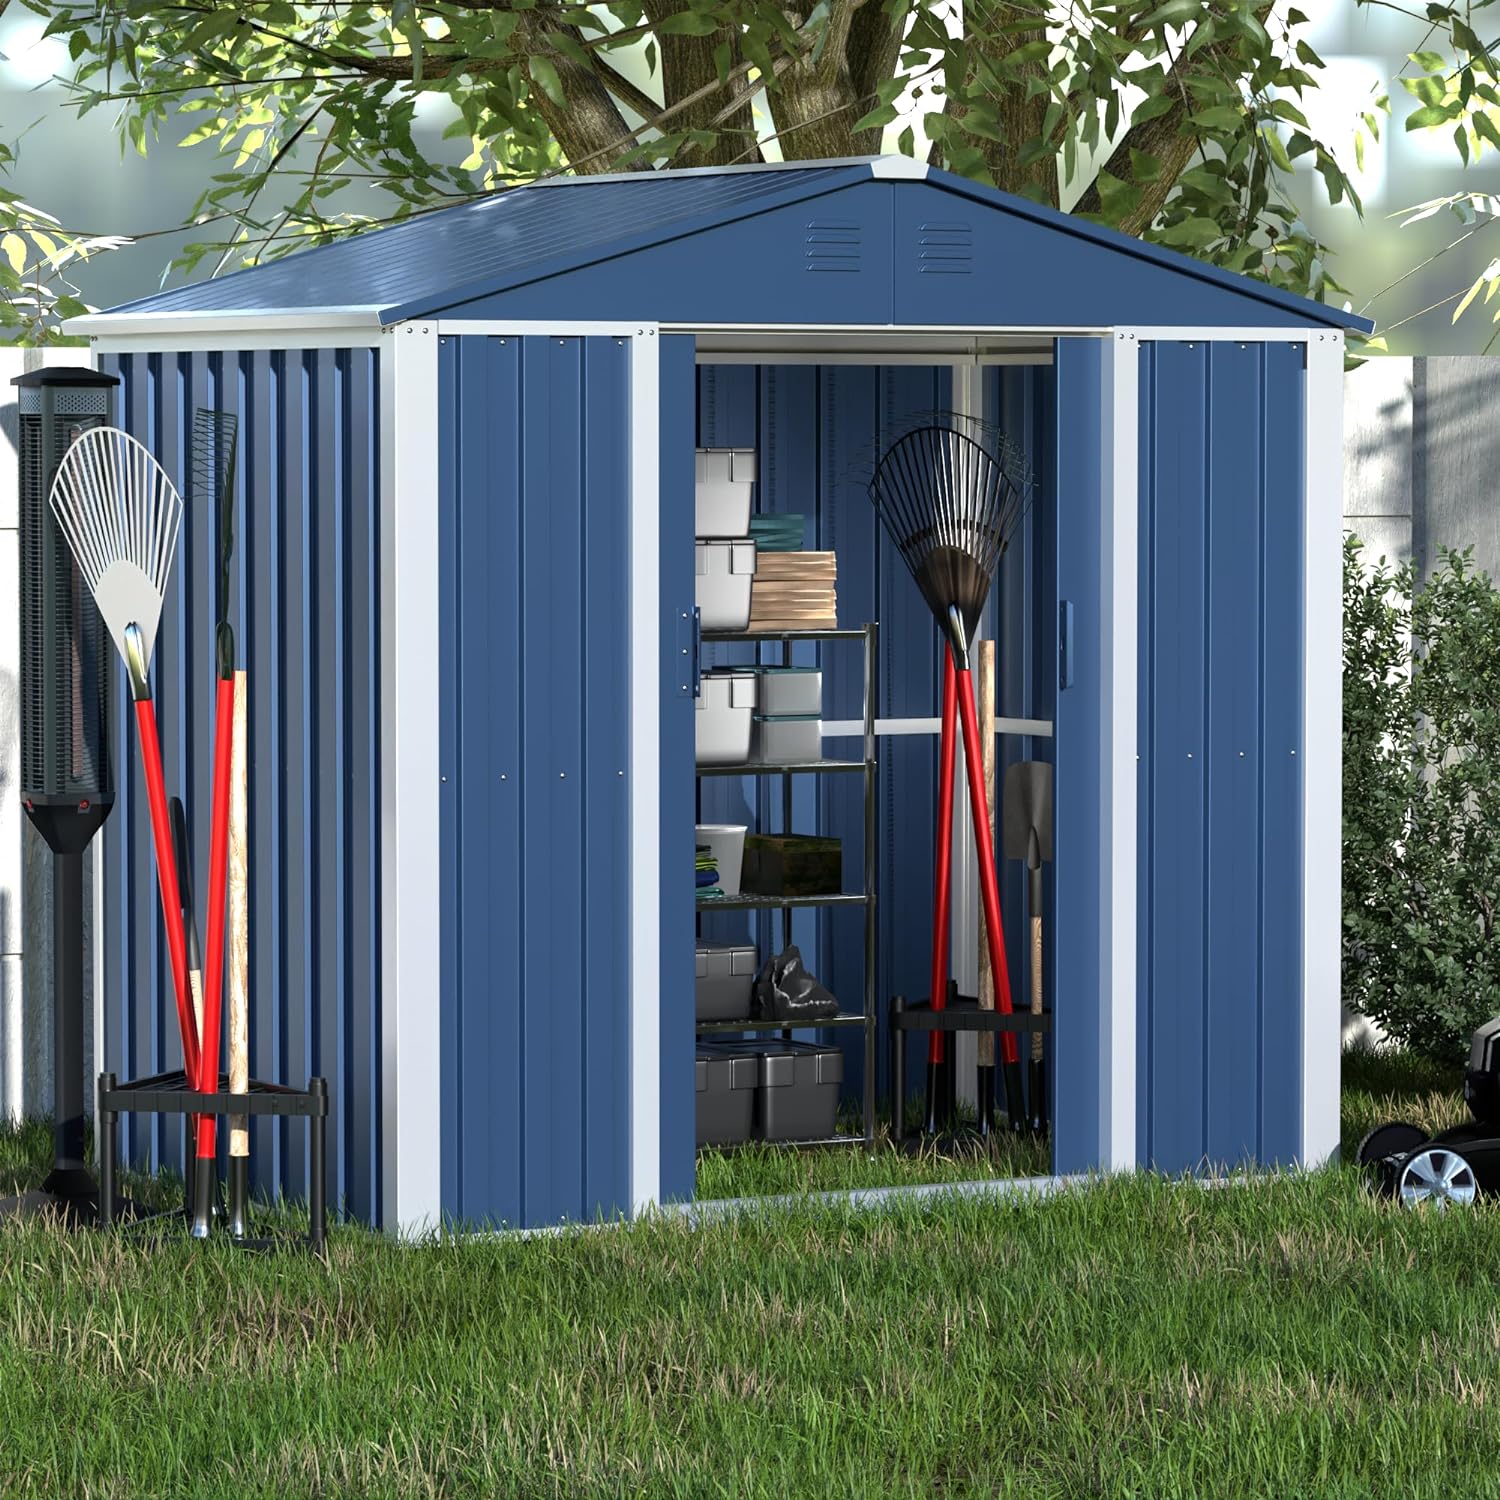 Yizosh Metal Outdoor Storage Shed, 6.4×4 FT Steel Utility Tool Shed Storage House with Sliding Door, Metal Sheds Outdoor Storage for Backyard Garden Patio Lawn (H6'xW6.4'x D4') Blue&White